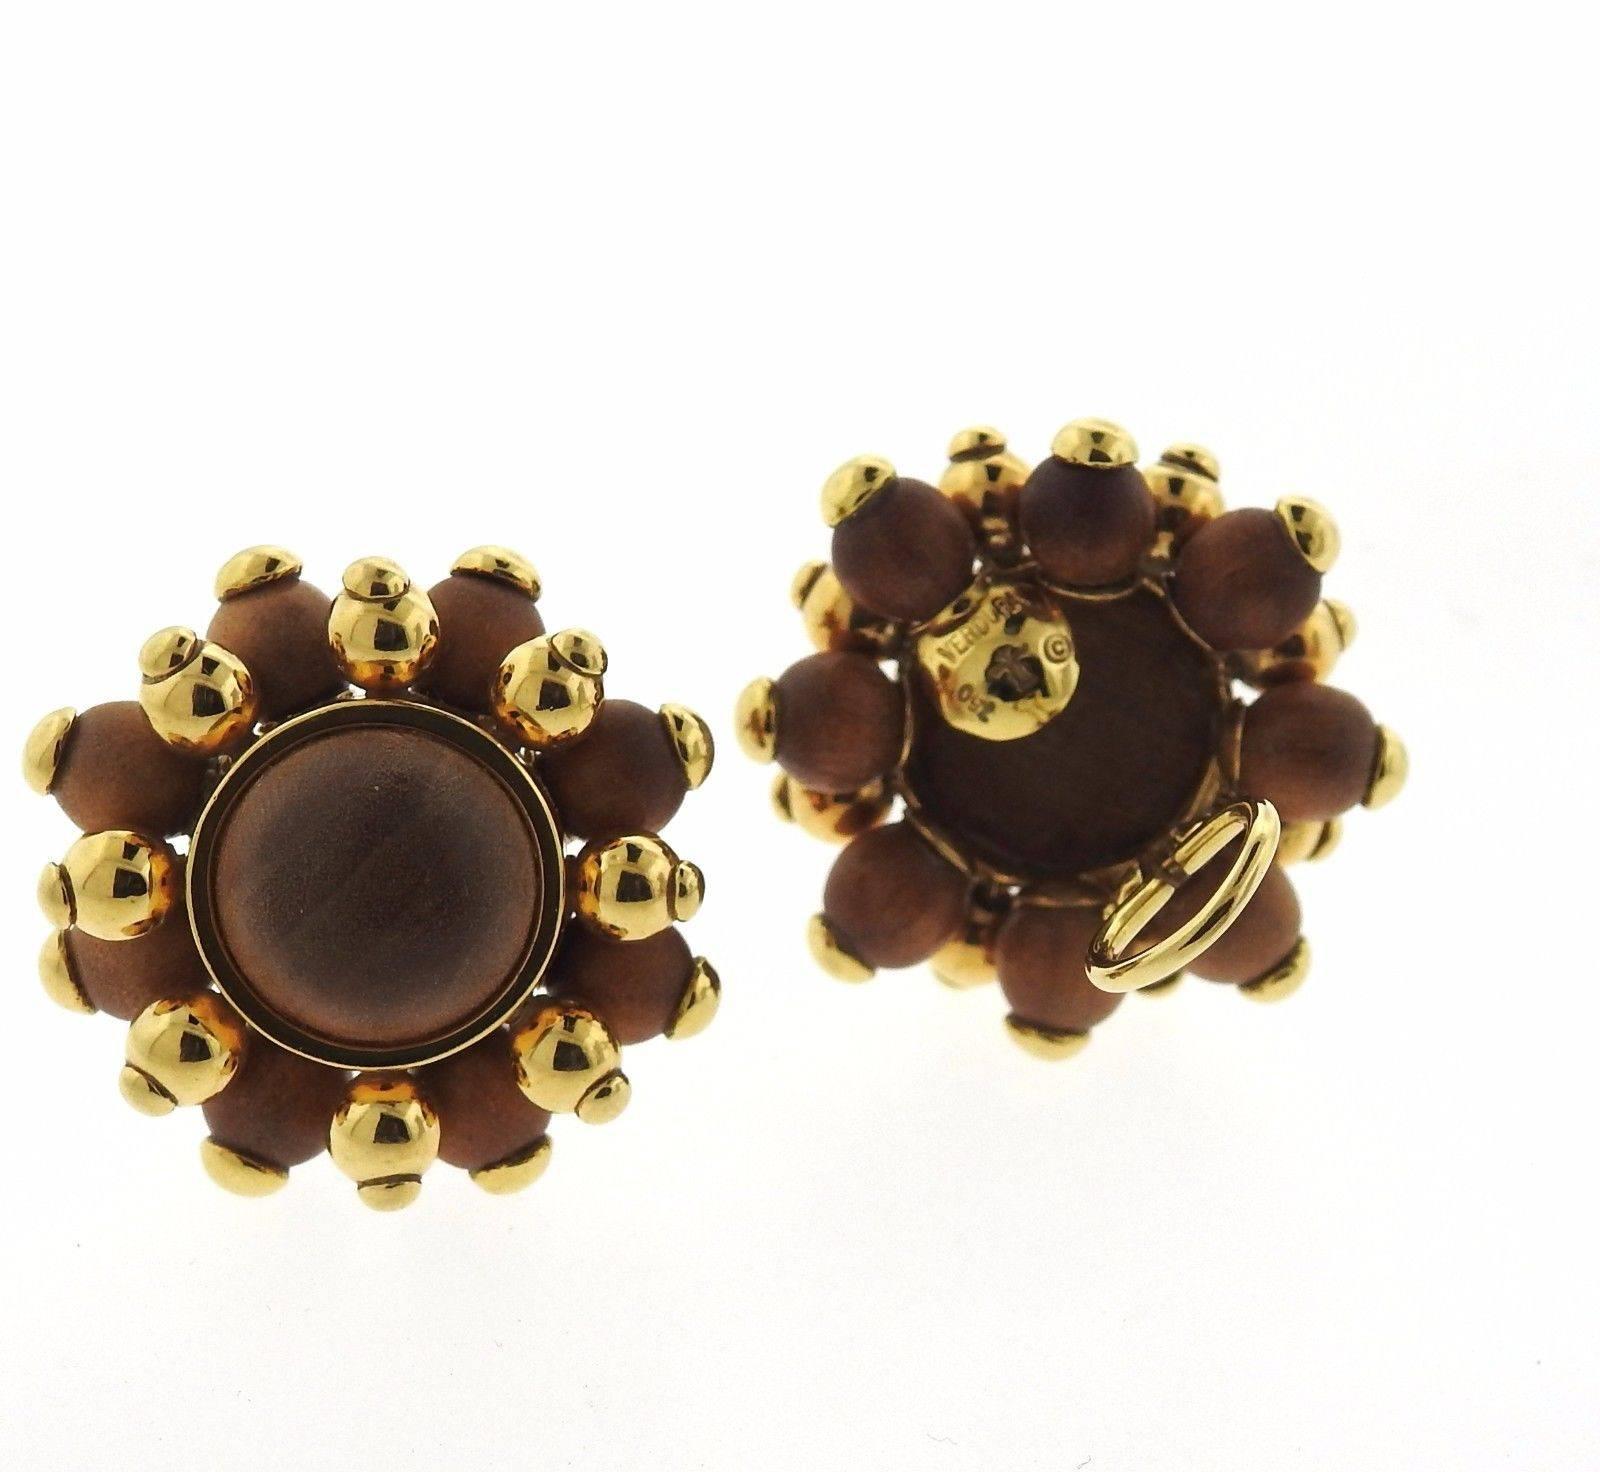 A pair of 18k gold and wood earrings by Verdura.  The earrings measure 38mm in diameter and weigh 19.8 grams.  Marked:	Verdura, 750, Maker's mark.